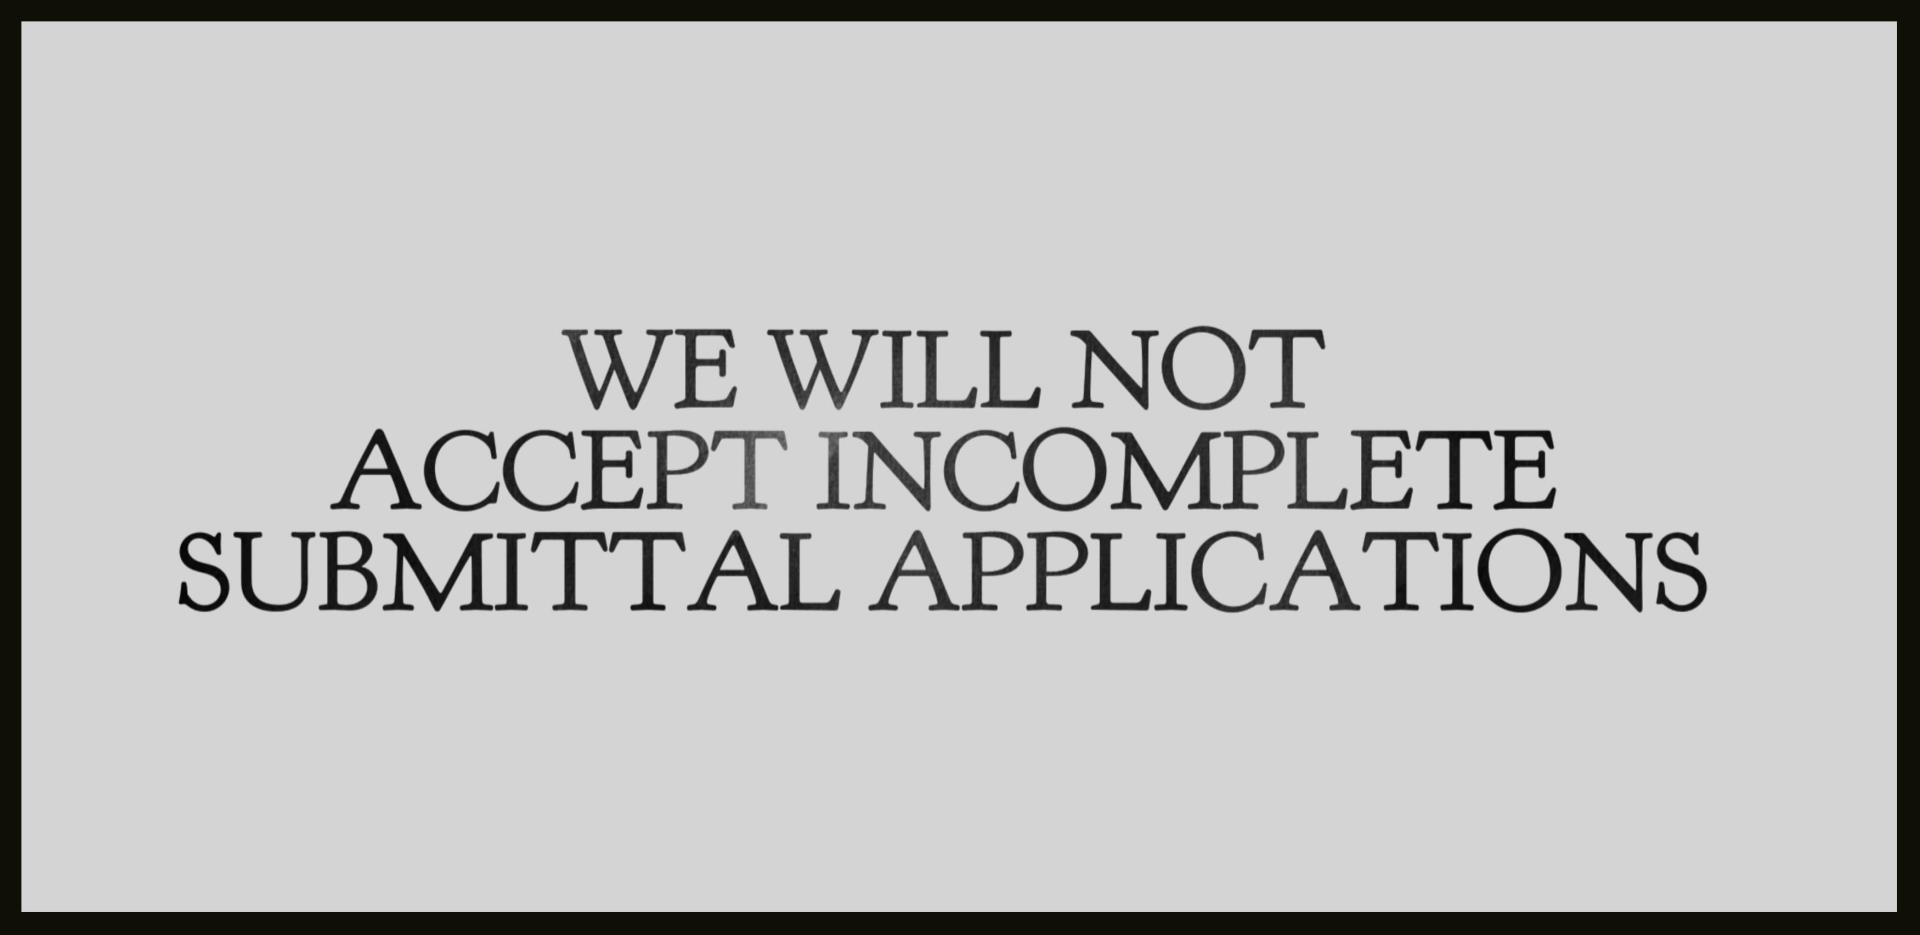 WE WILL NOT ACCEPT INCOMPLETE SUBMITTAL APPLICATIONS